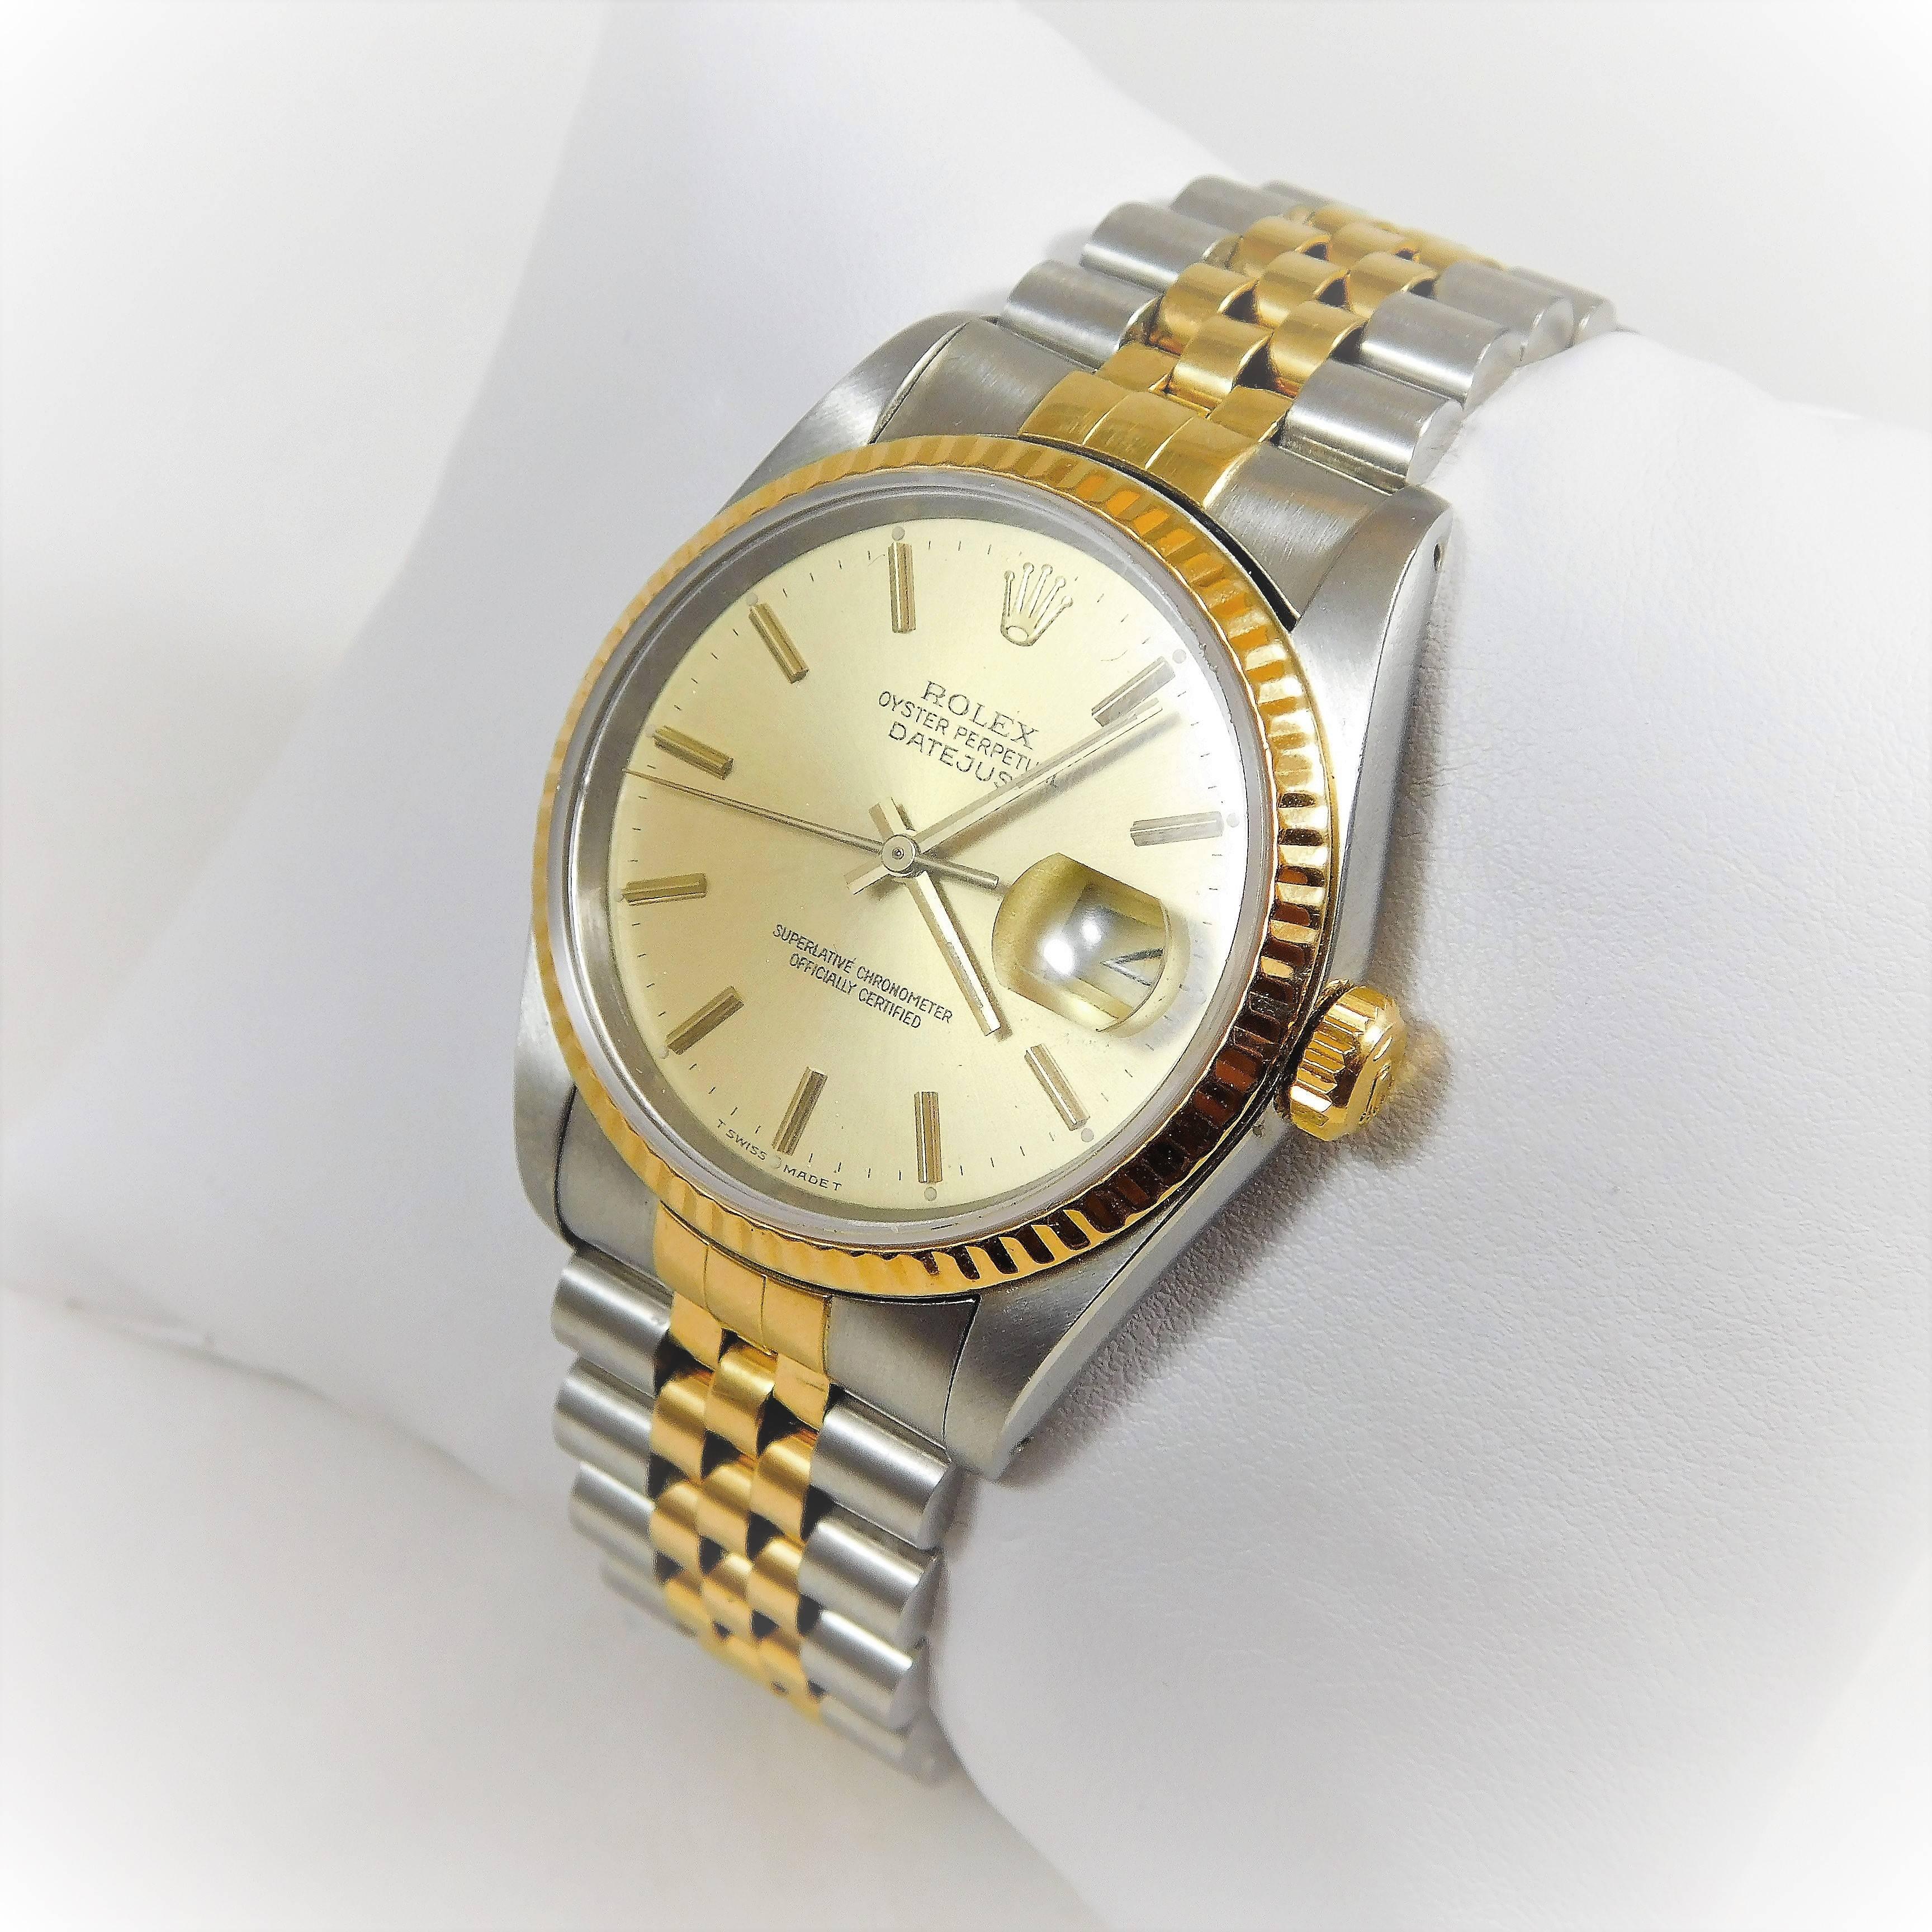 Men's Rolex yellow gold Stainless Steel Oyster Perpetual Datejust Automatic Wristwatch